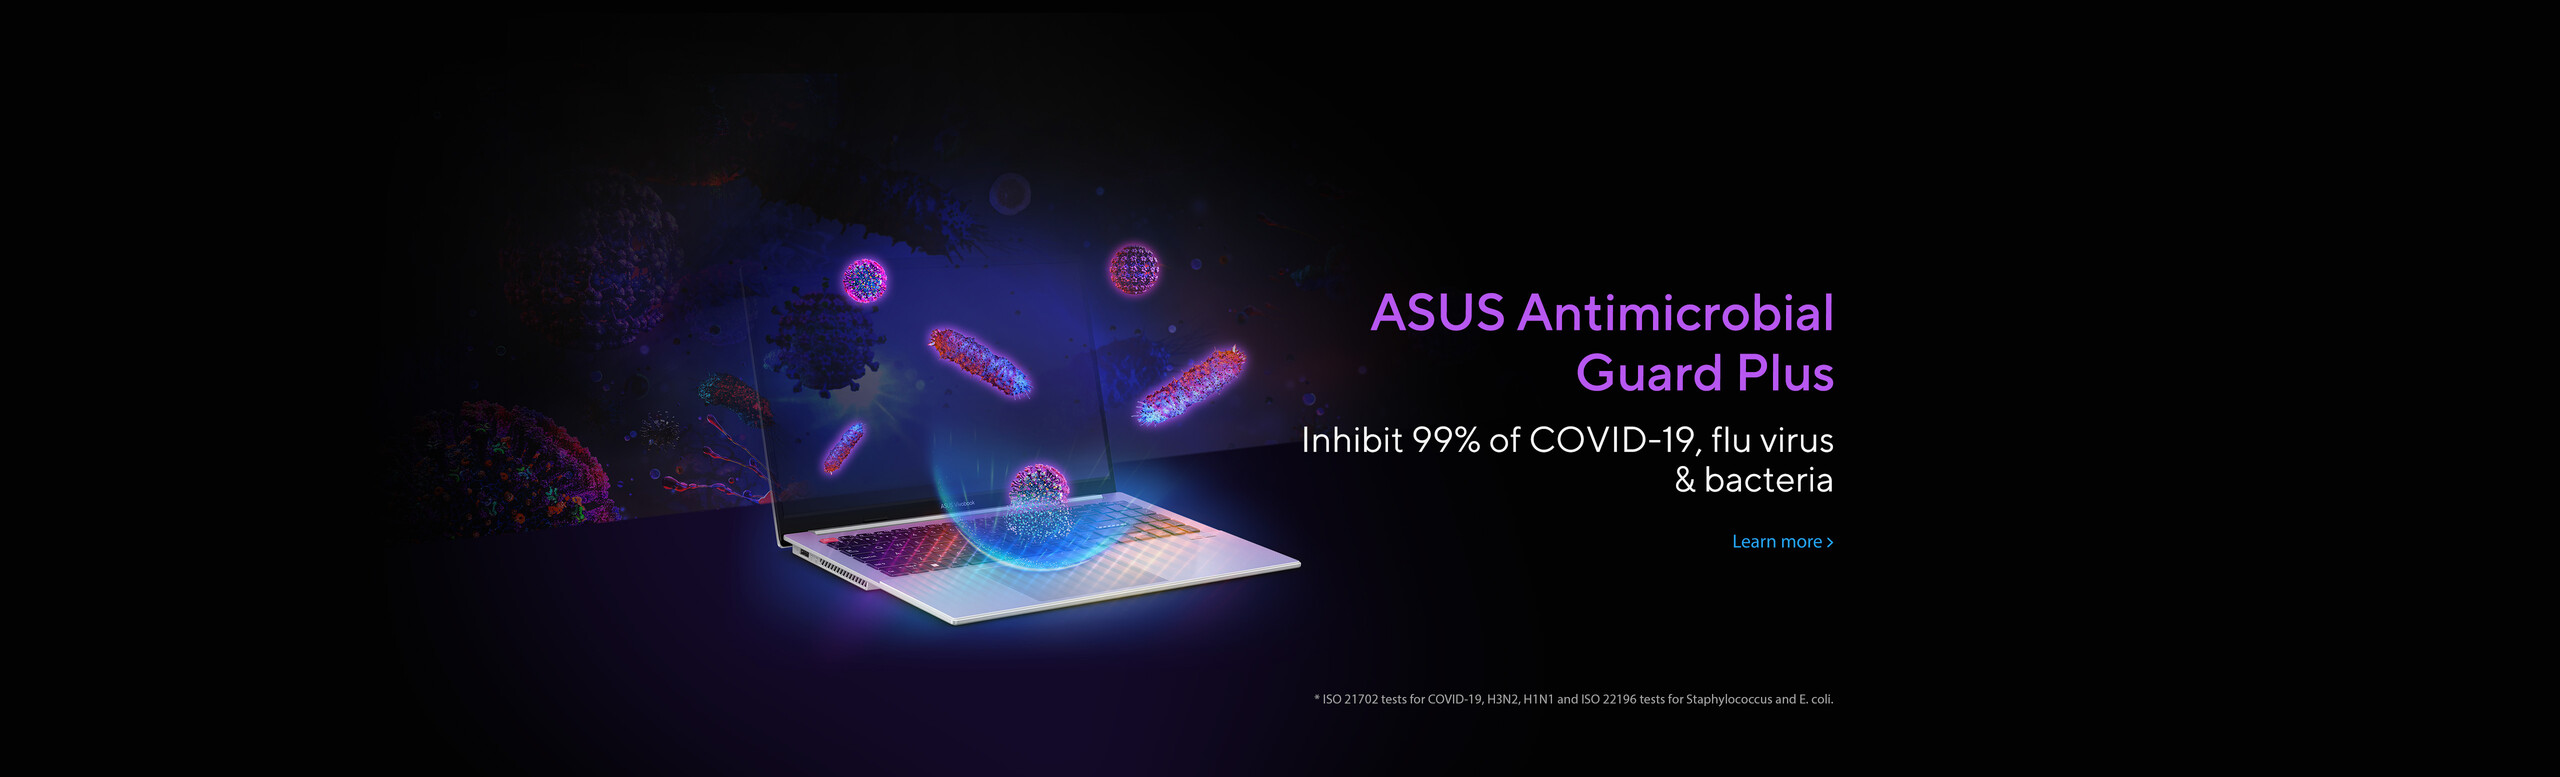 ASUS Antimicrobial Technology